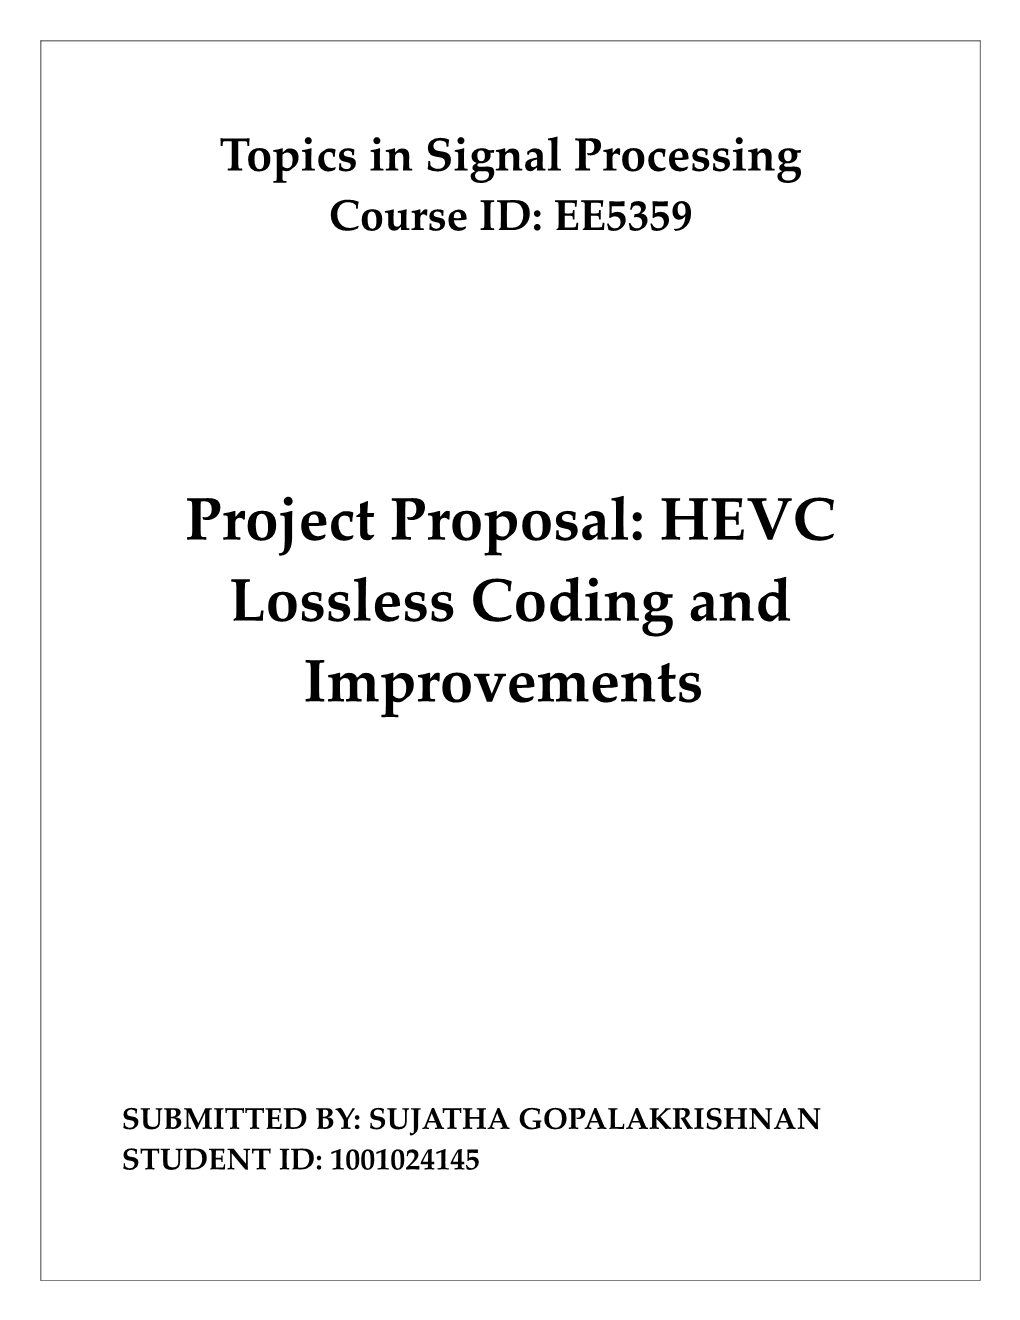 Project Proposal: HEVC Lossless Coding and Improvements